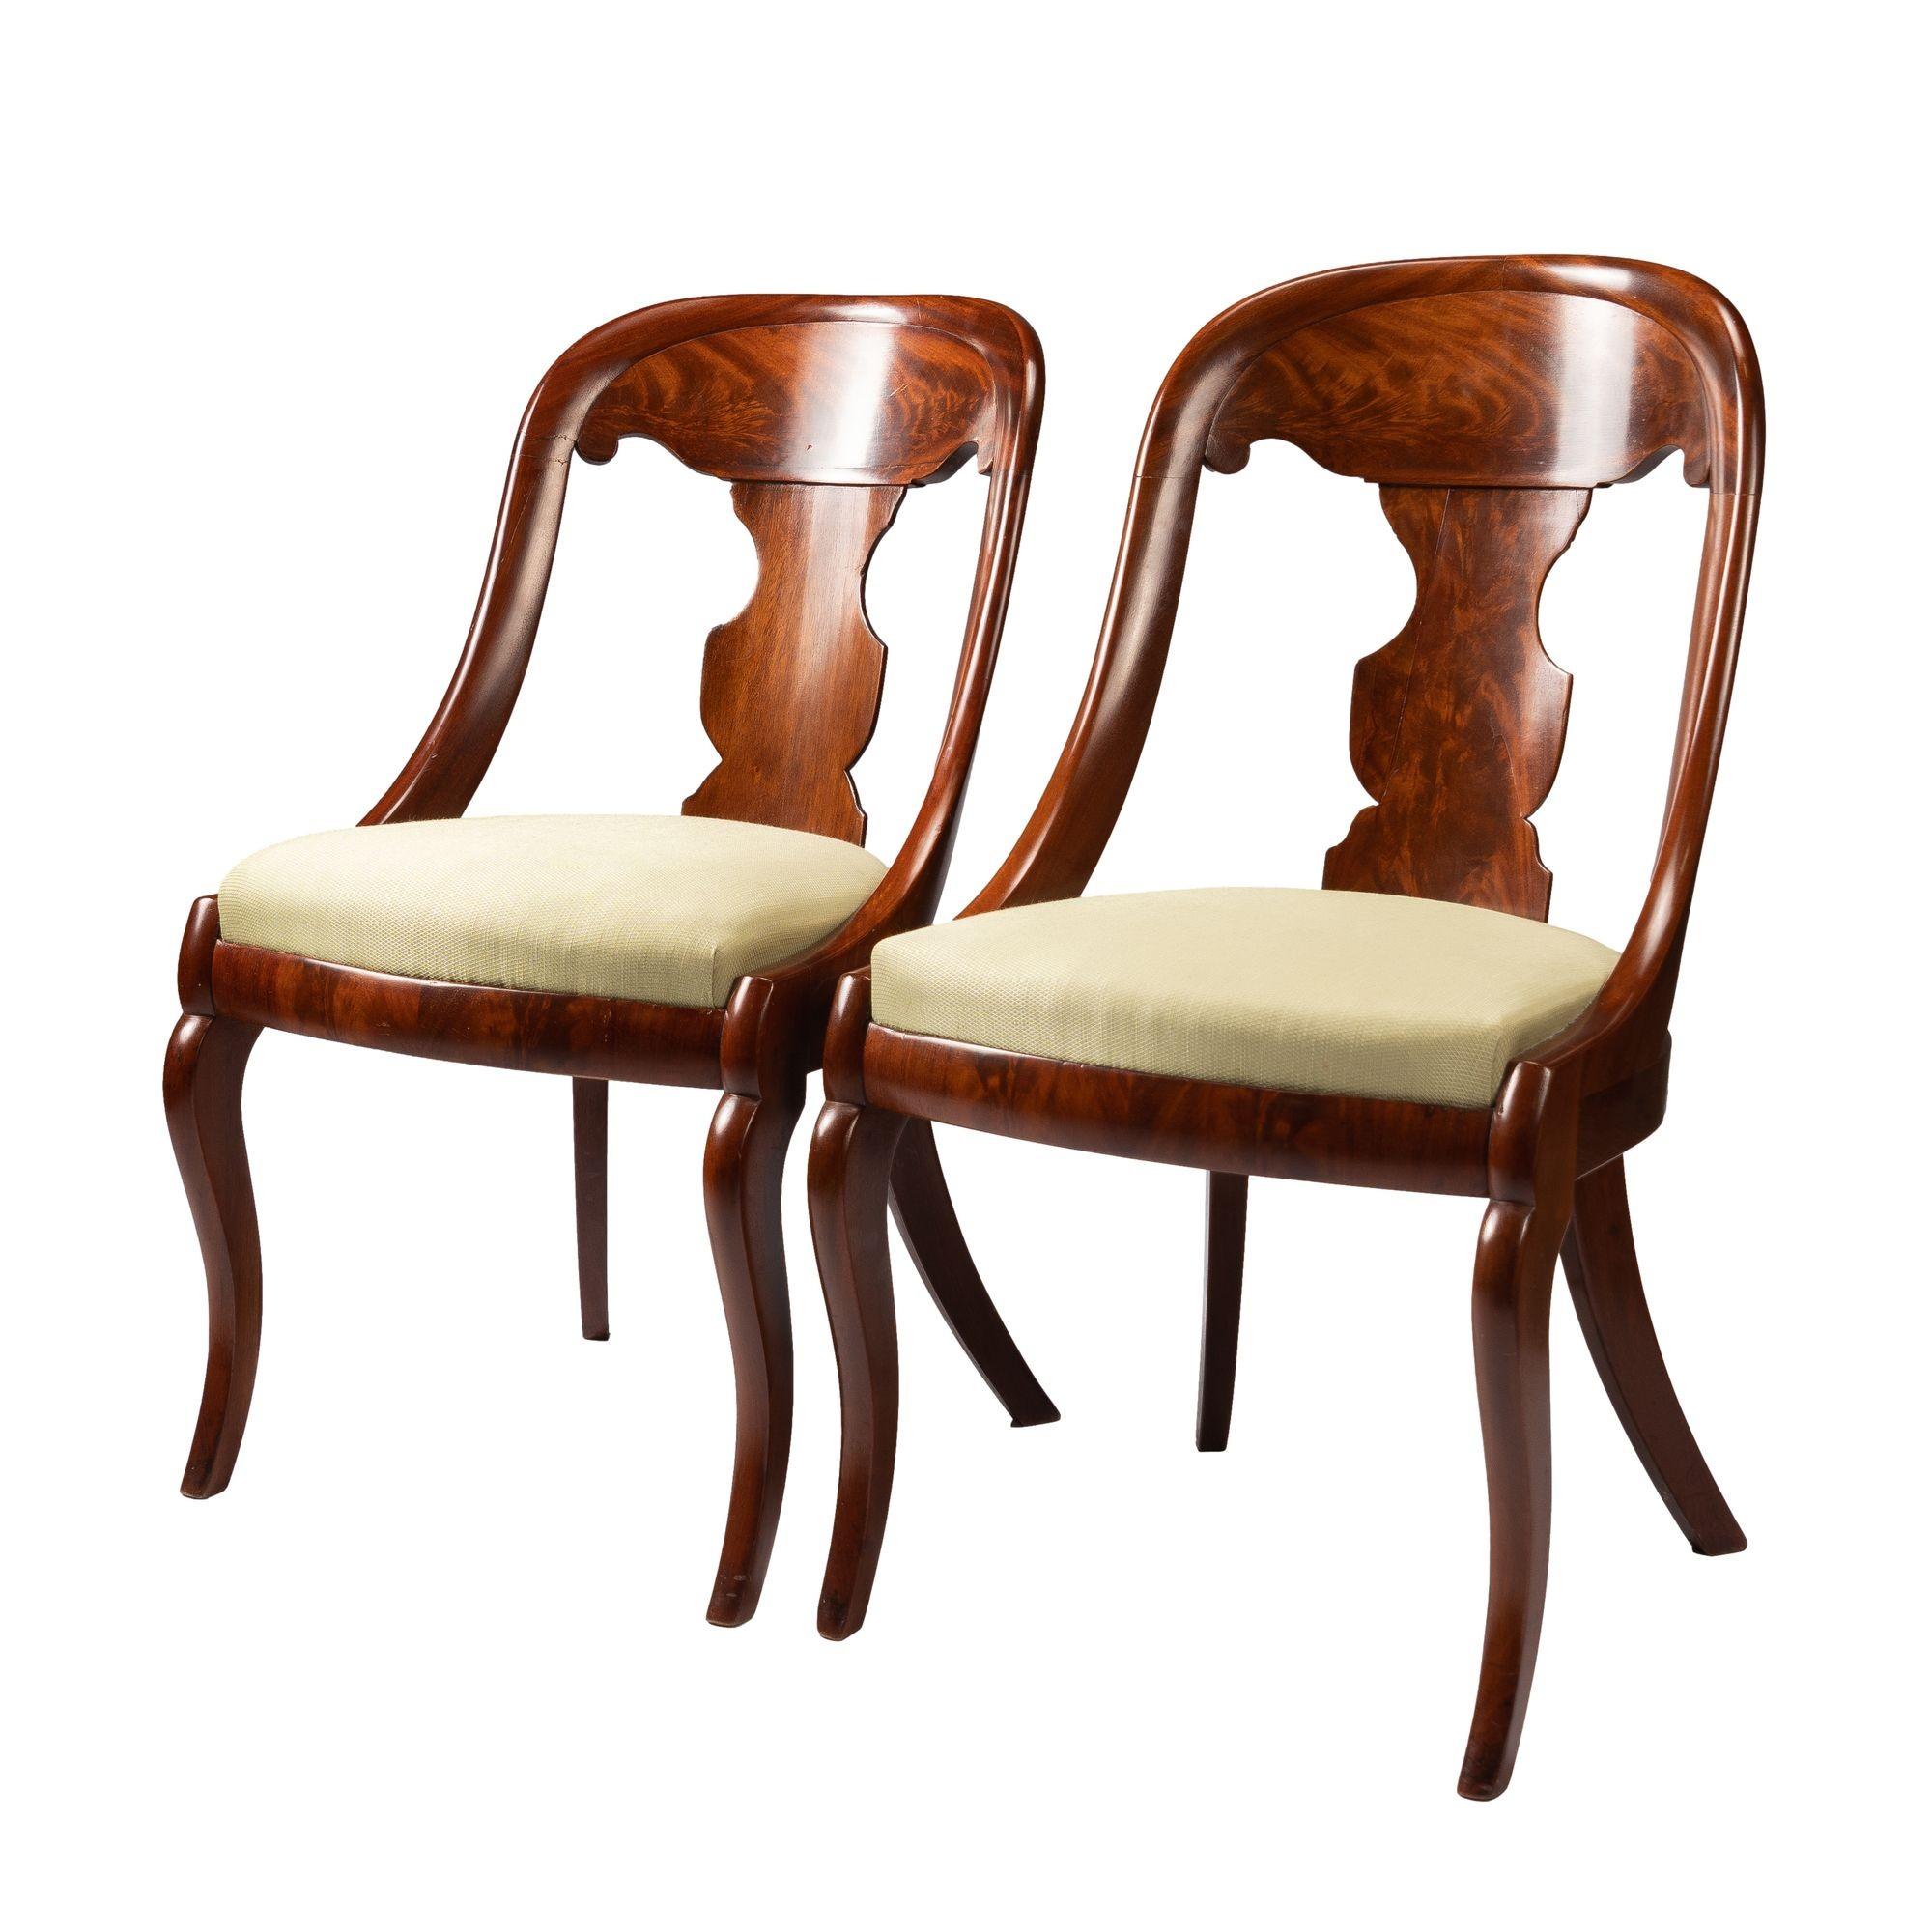 Pair of American mahogany and figured mahogany veneered gondola chairs. The chairs feature a boxed slip seat & single vertical baluster form silhouette back splat below a crest rail. The back is defined by a continuous bull nose molding encompassing